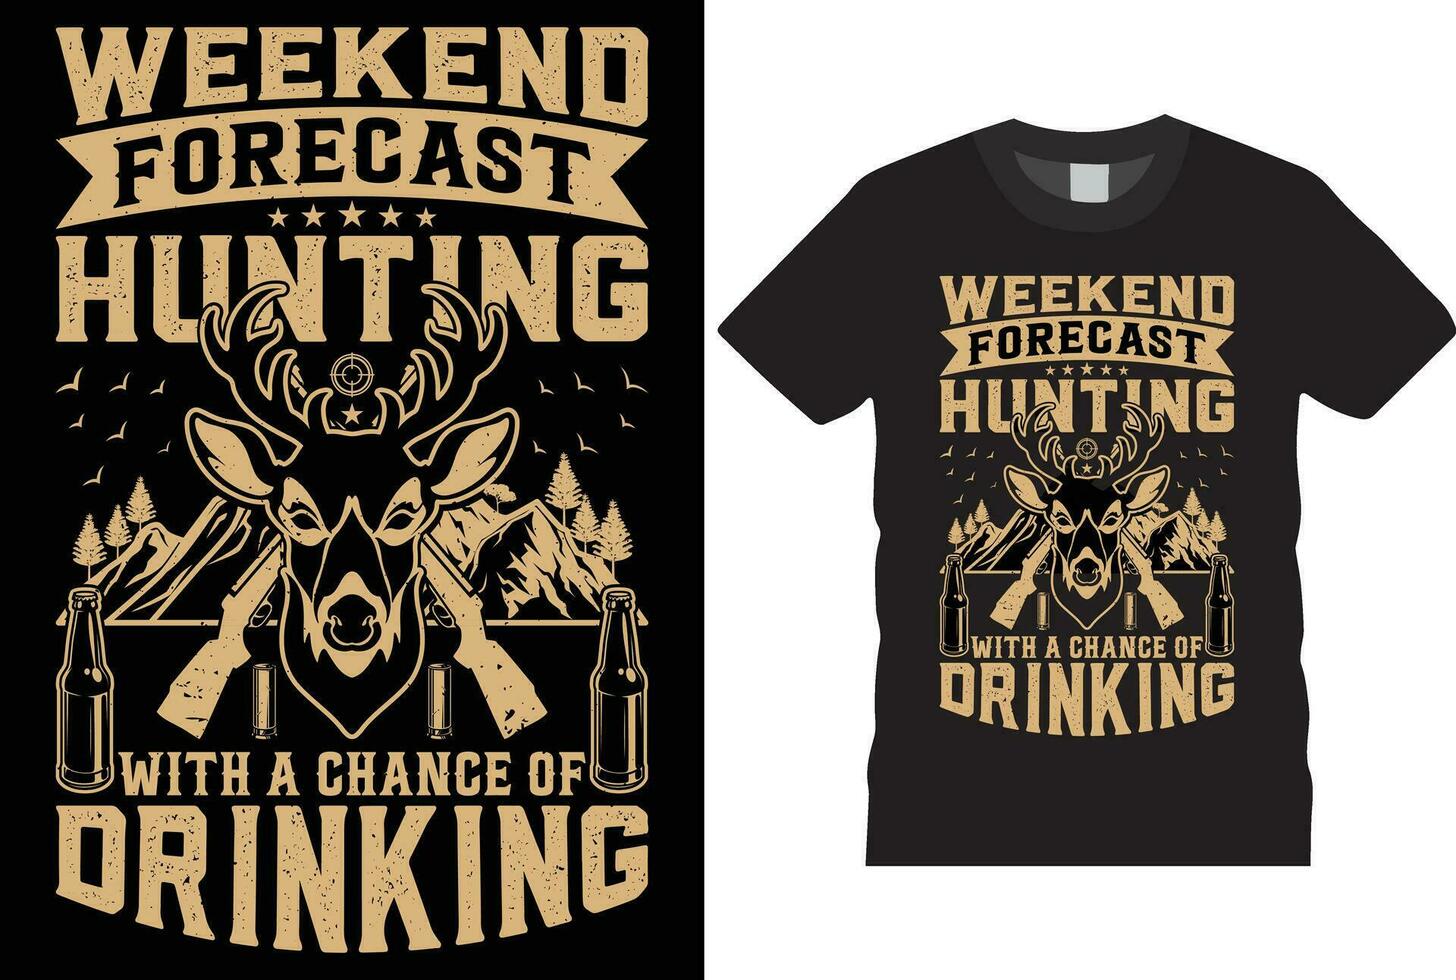 Weekend forecast hunting with chance of drinking shirts template. Hunters T shirt vector templates design. With grunge , rifles, deer, drink tshirt designs. Ready or print in poster, T-shirts, mugs.